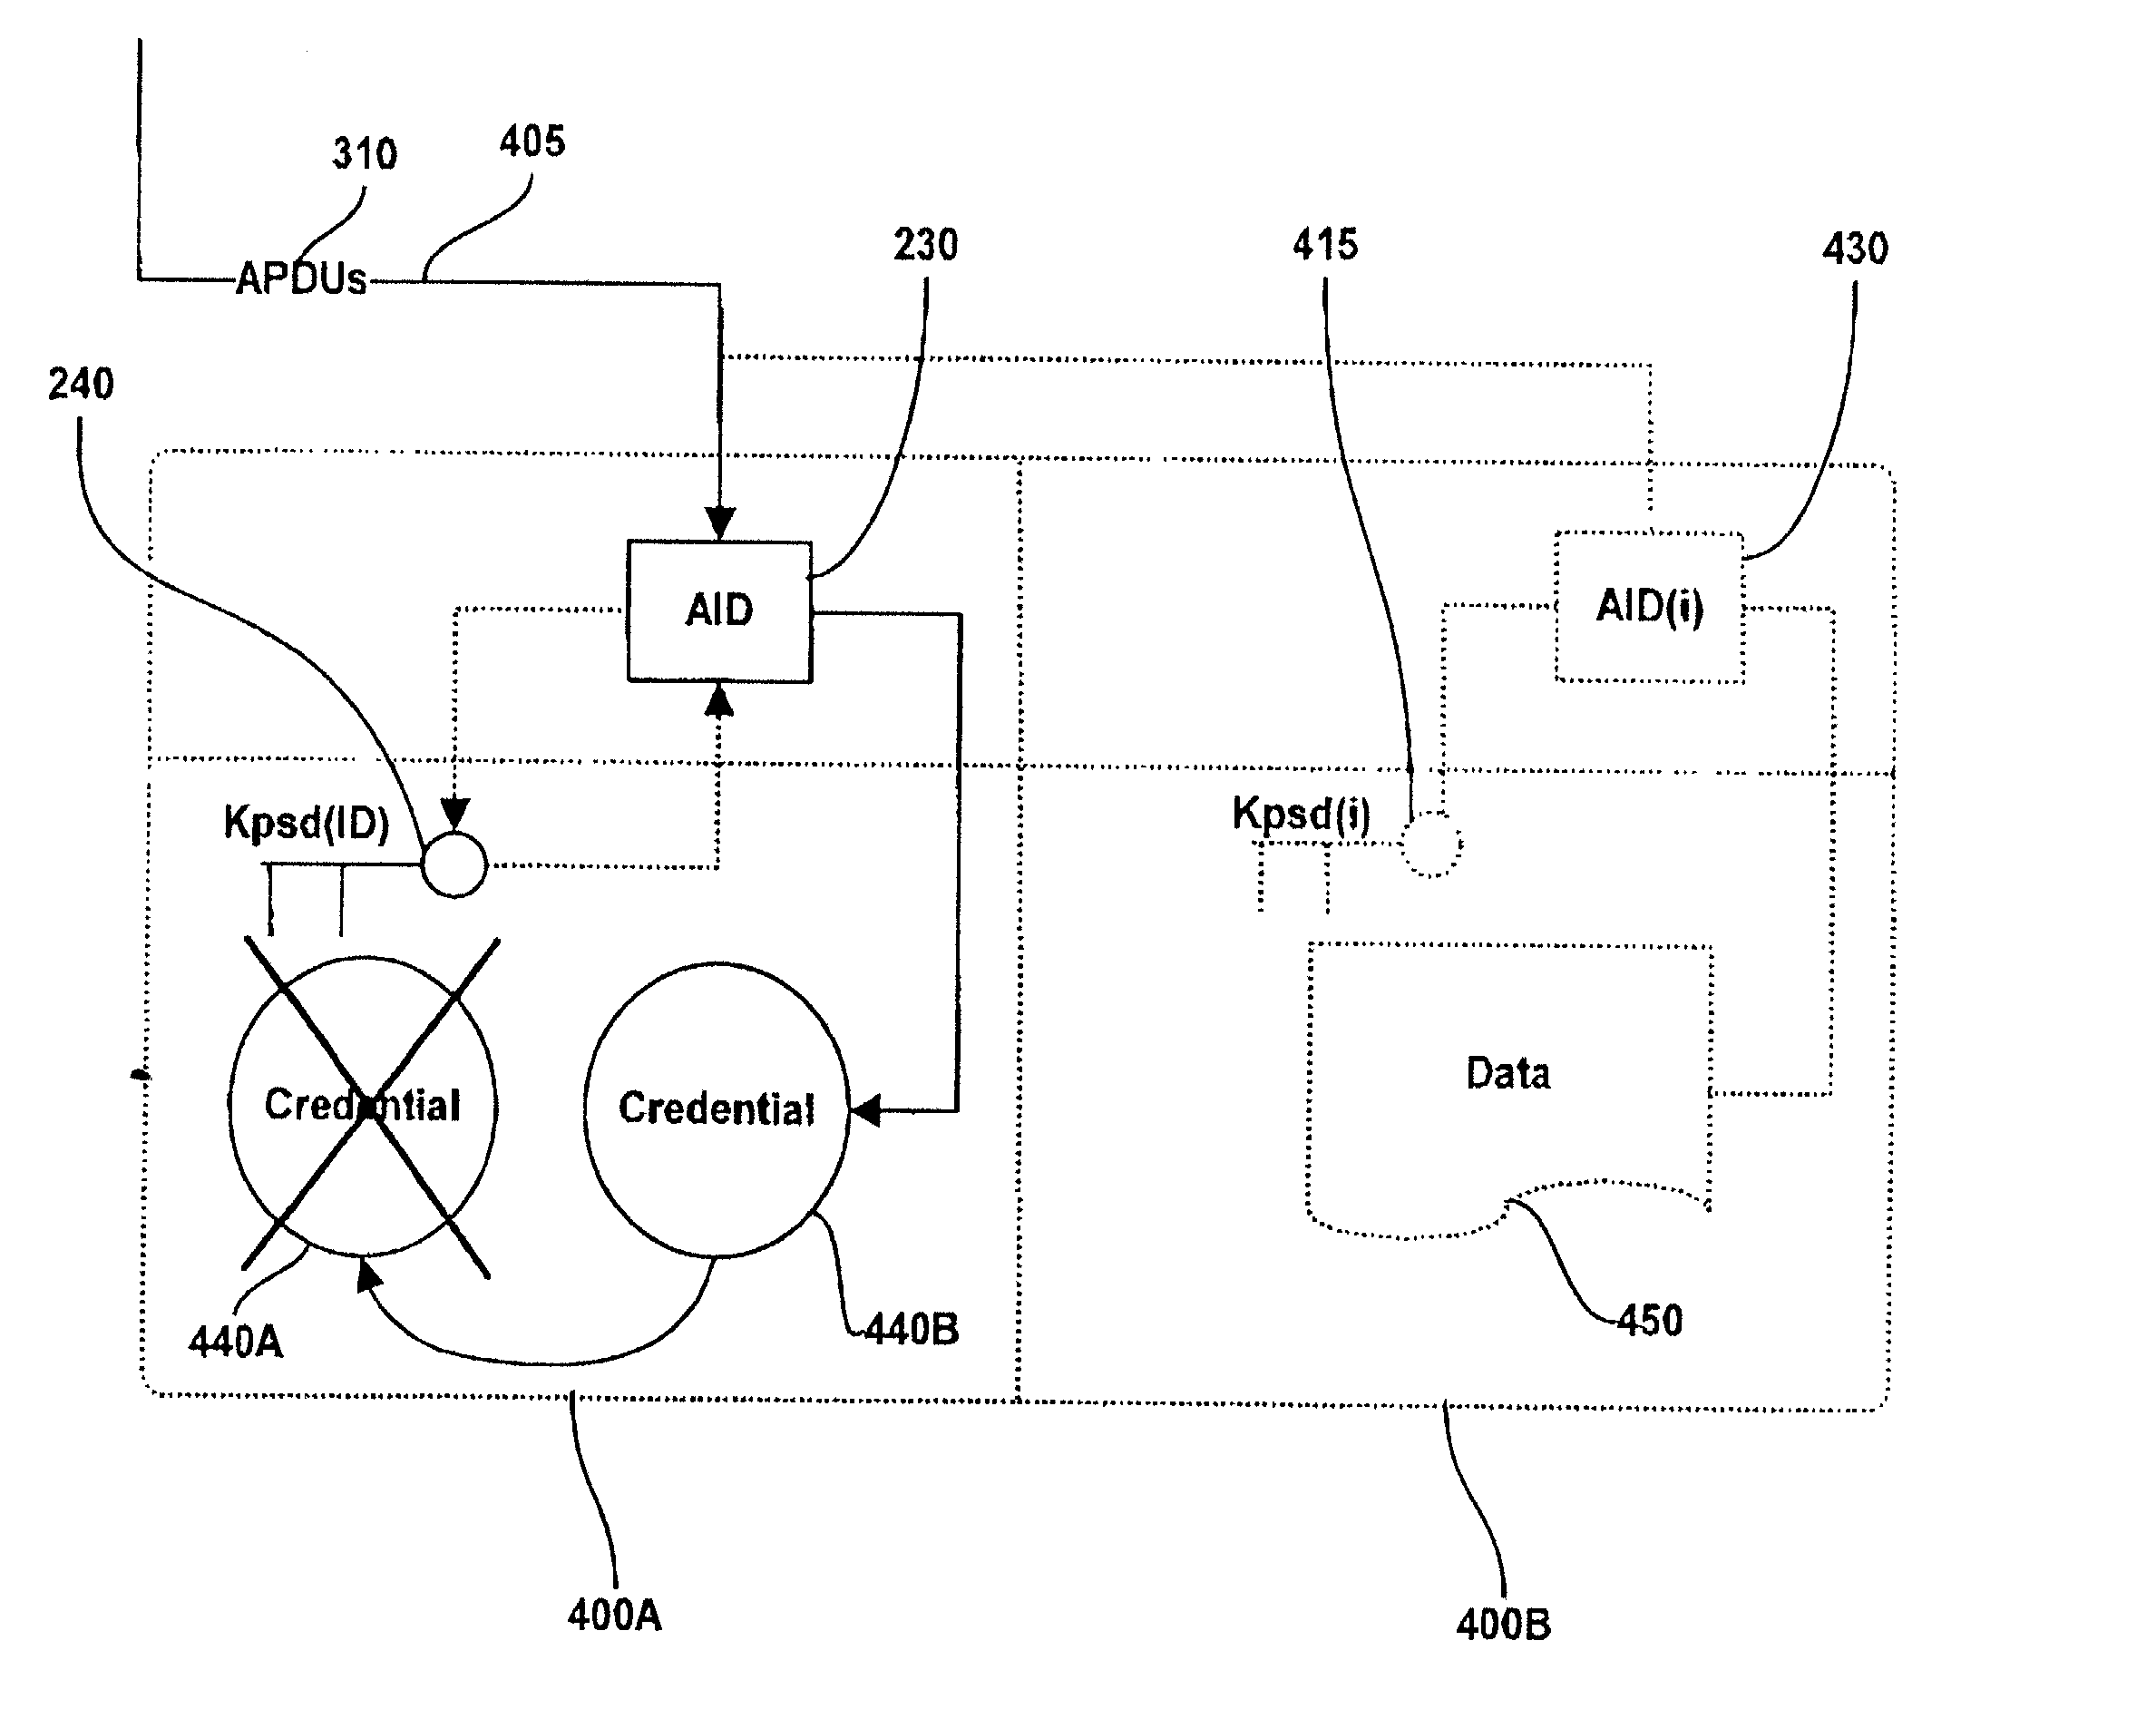 Method and system for performing post issuance configuration and data changes to a personal security device using a communications pipe